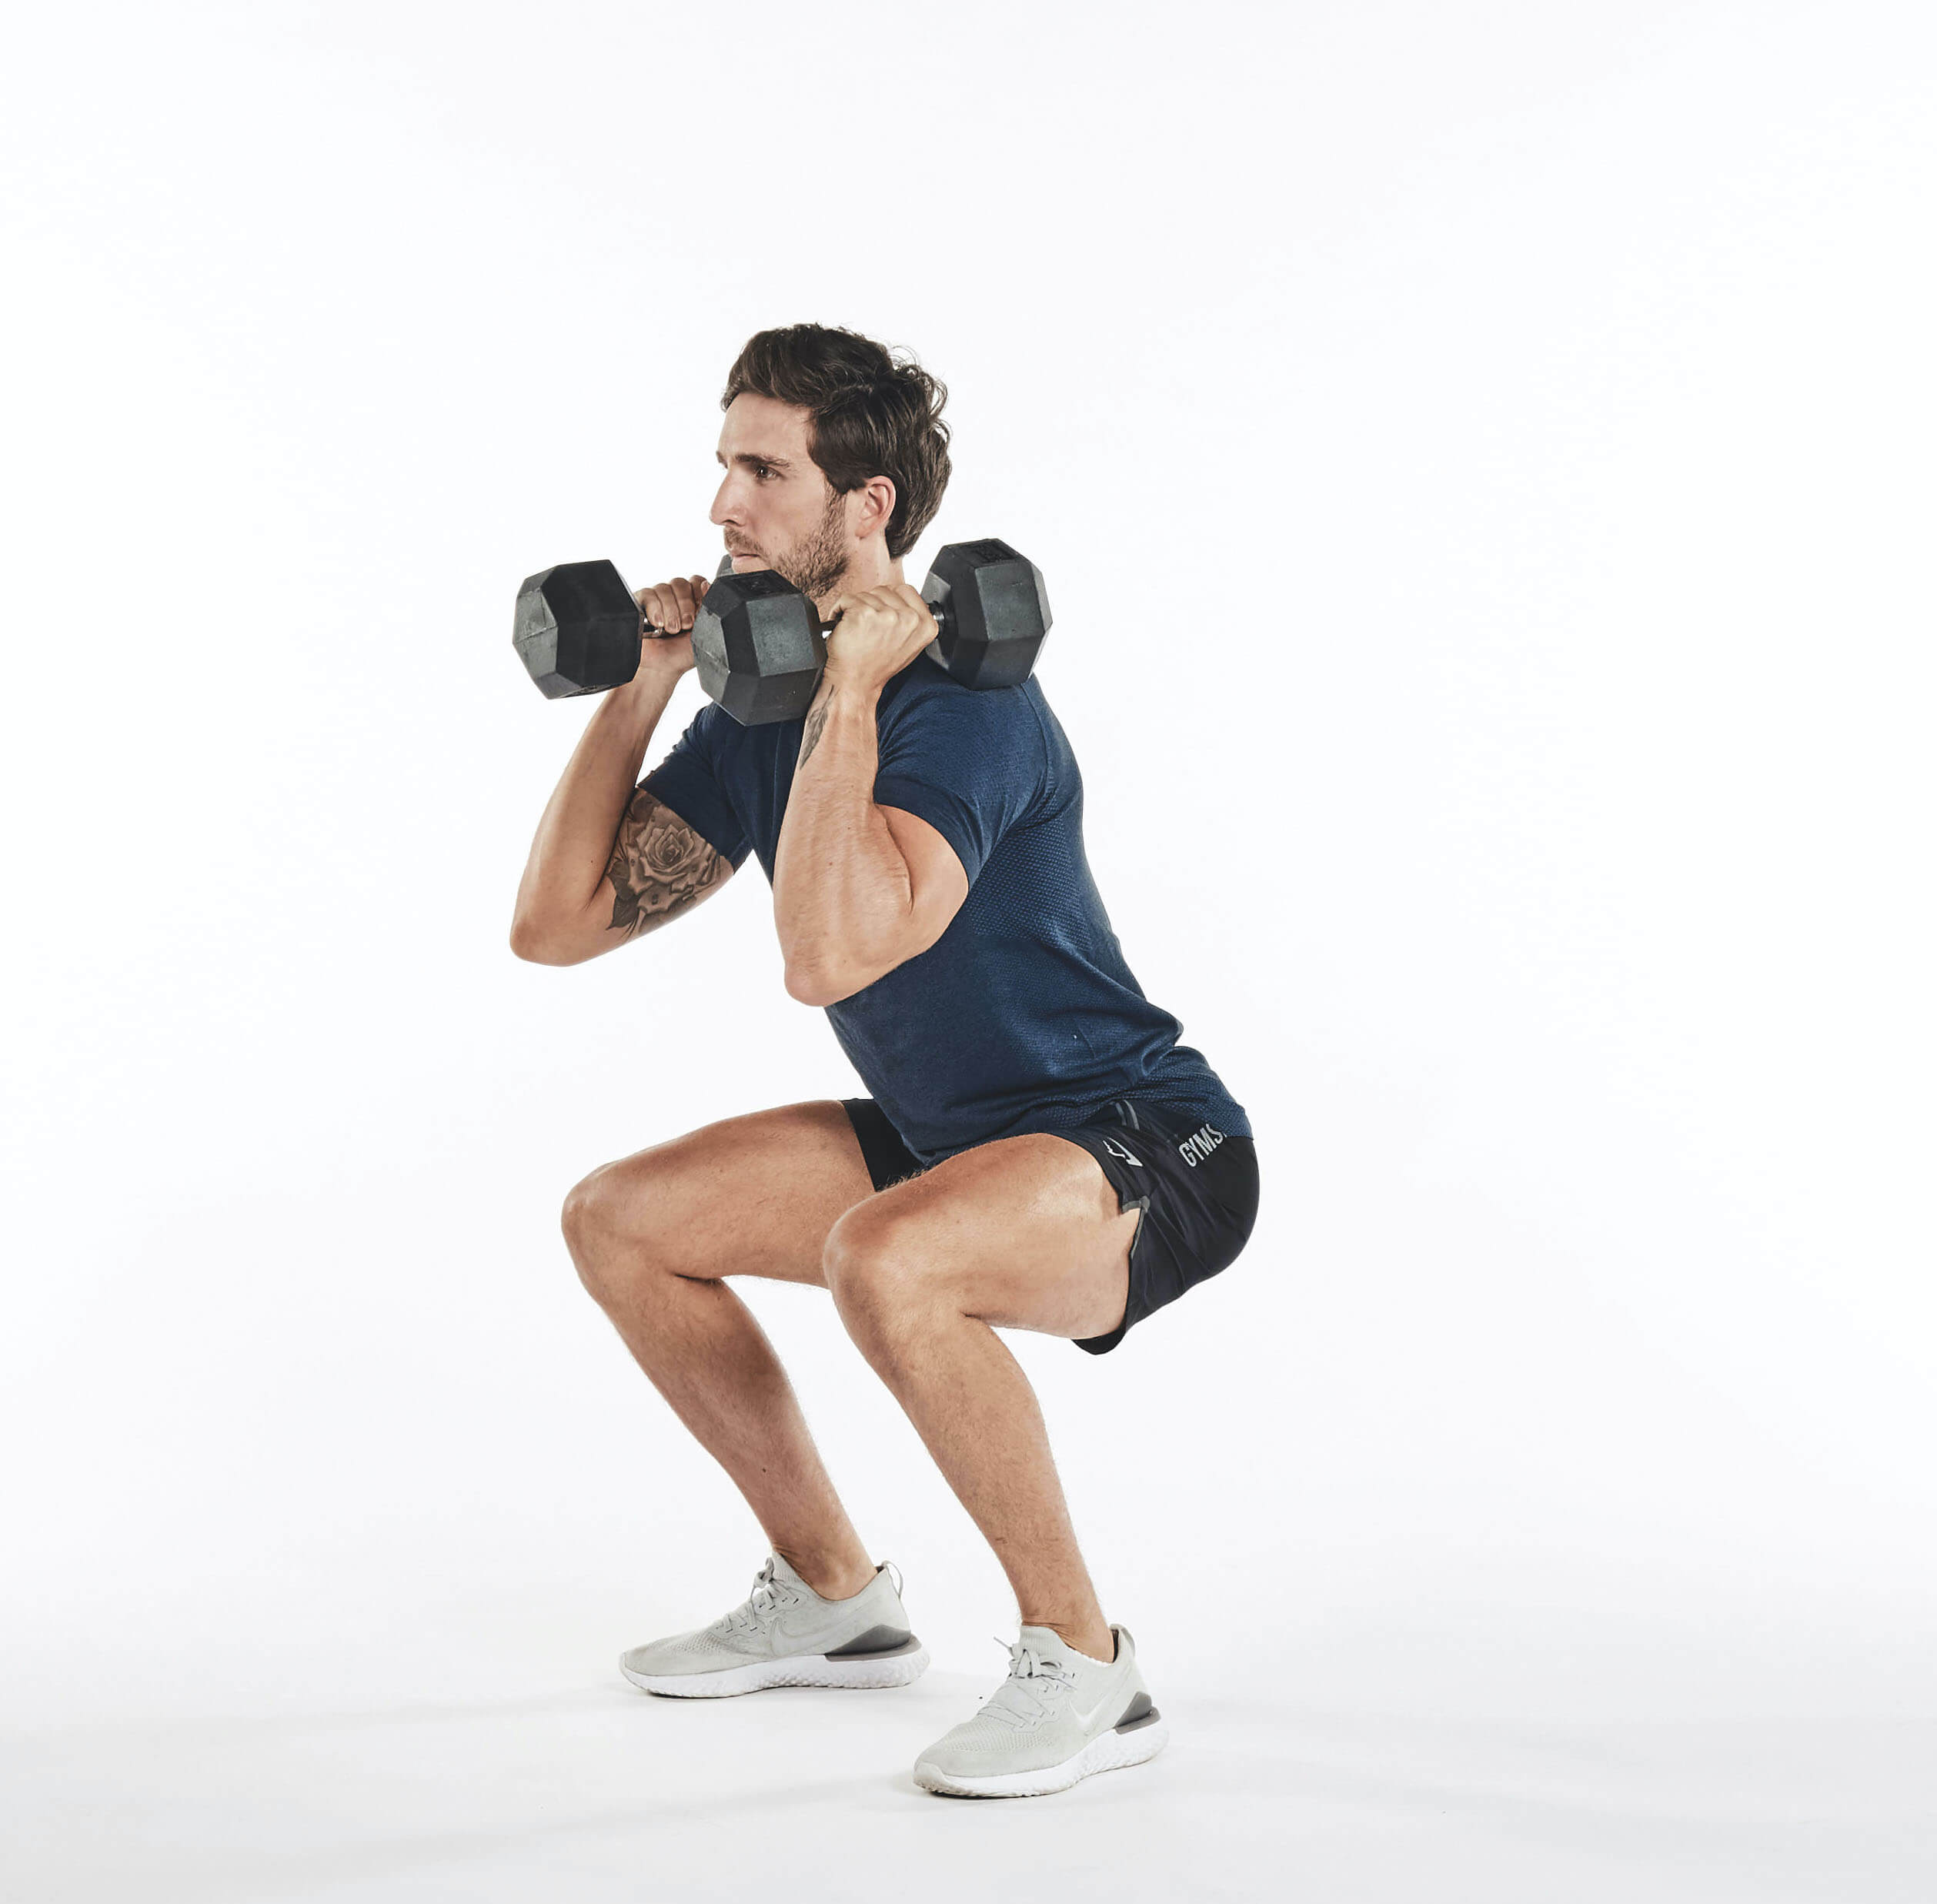 PT performing dumbbell thruster as part of a 15-minute dumbbell workout